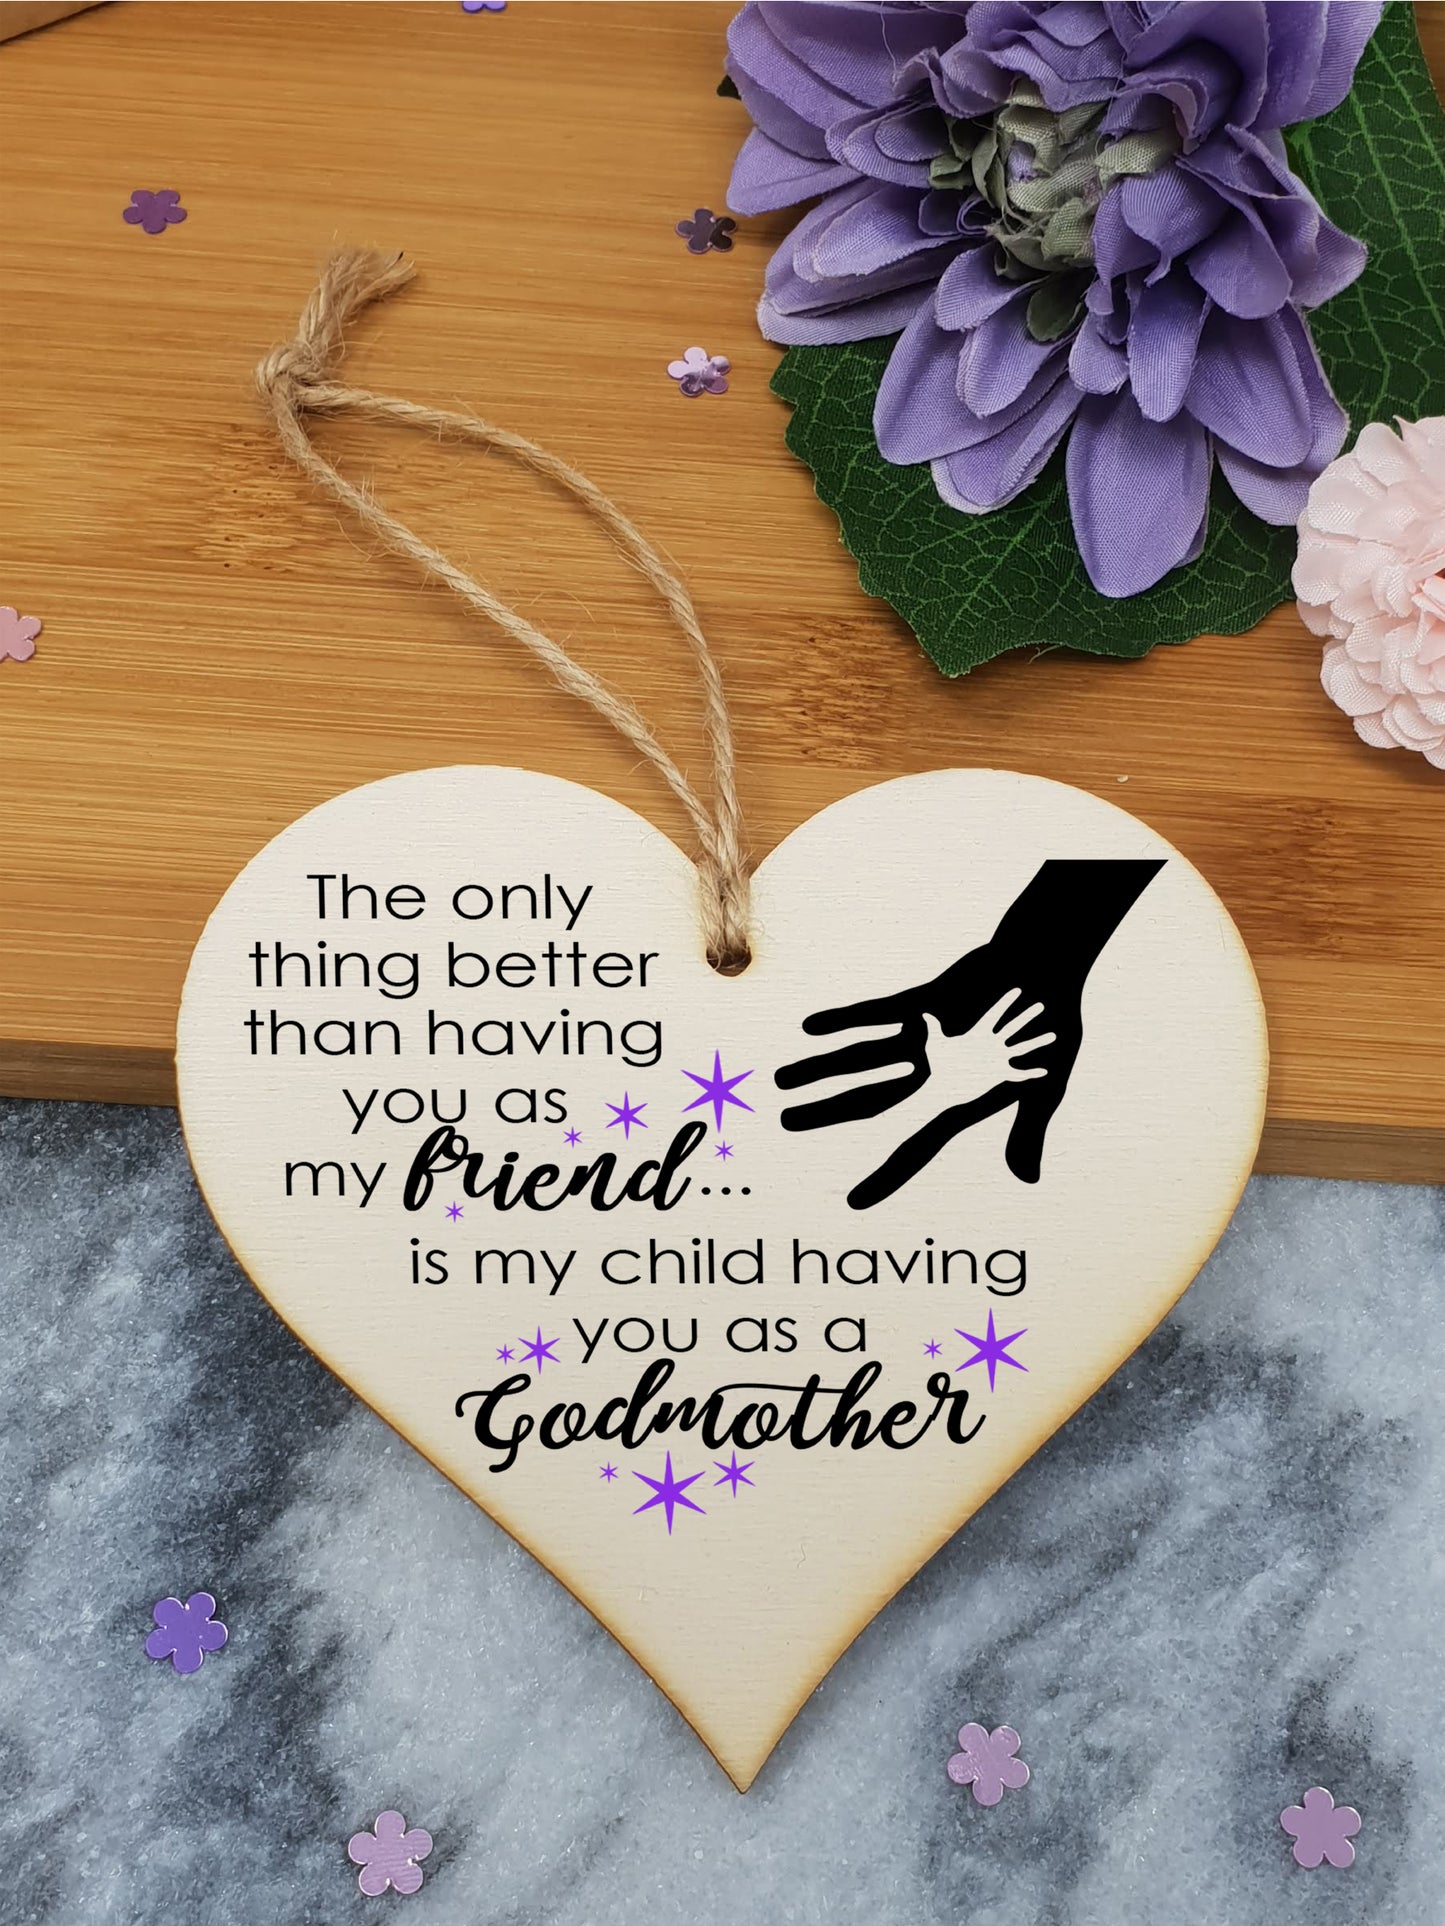 Handmade Wooden Hanging Heart Plaque Gift for Friend Godmother Loving Thoughtful Thank You Keepsake